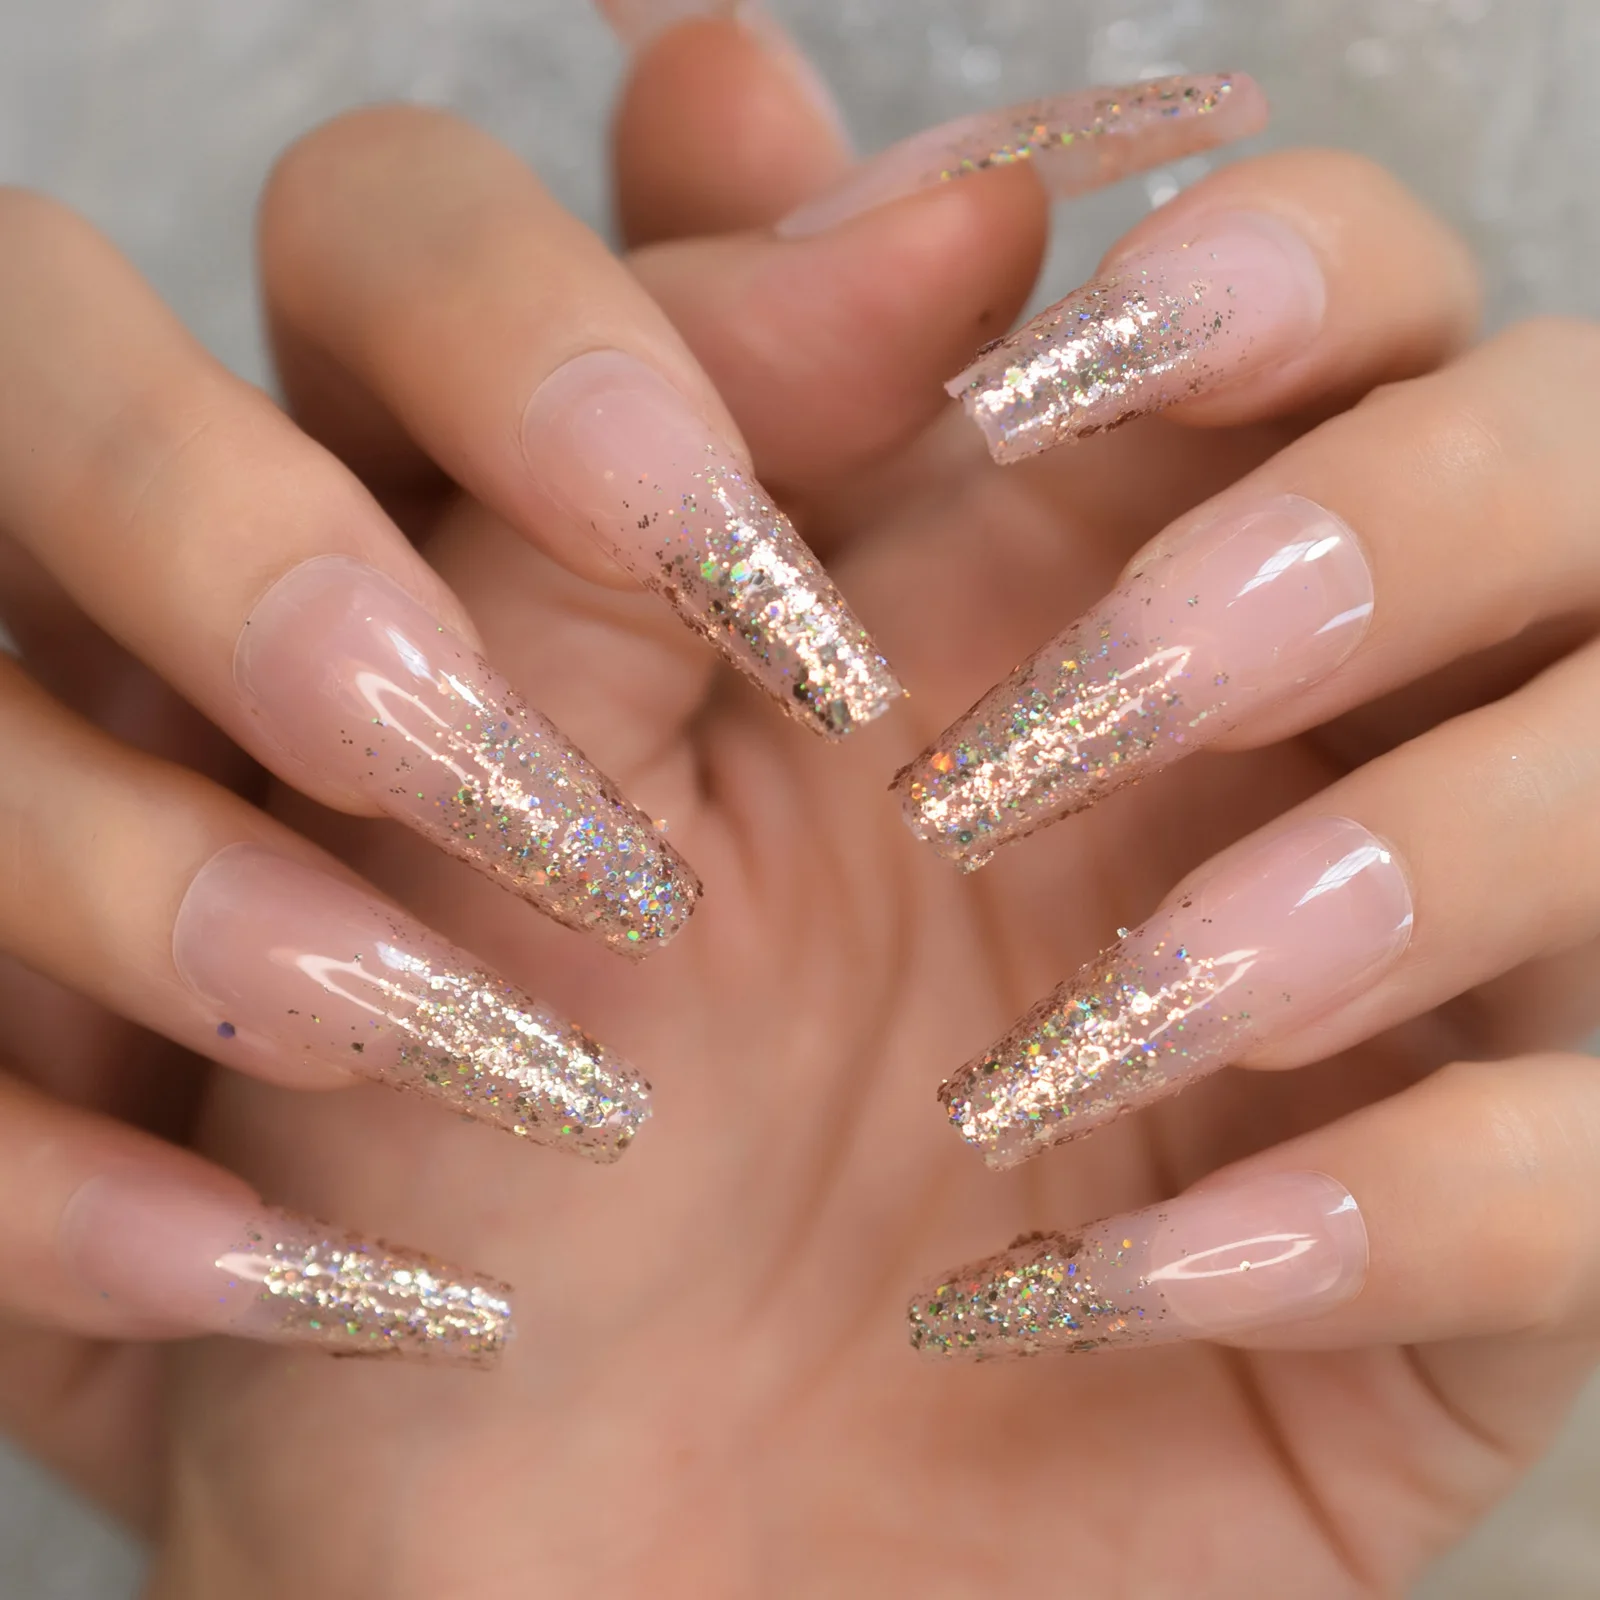 Glossy Coffin Nail Glitter Fingernails Tip Fake Nail With Desgins Pink Extra Long Nails Lovely Manicure Press On Fake Nails Cute images - 6